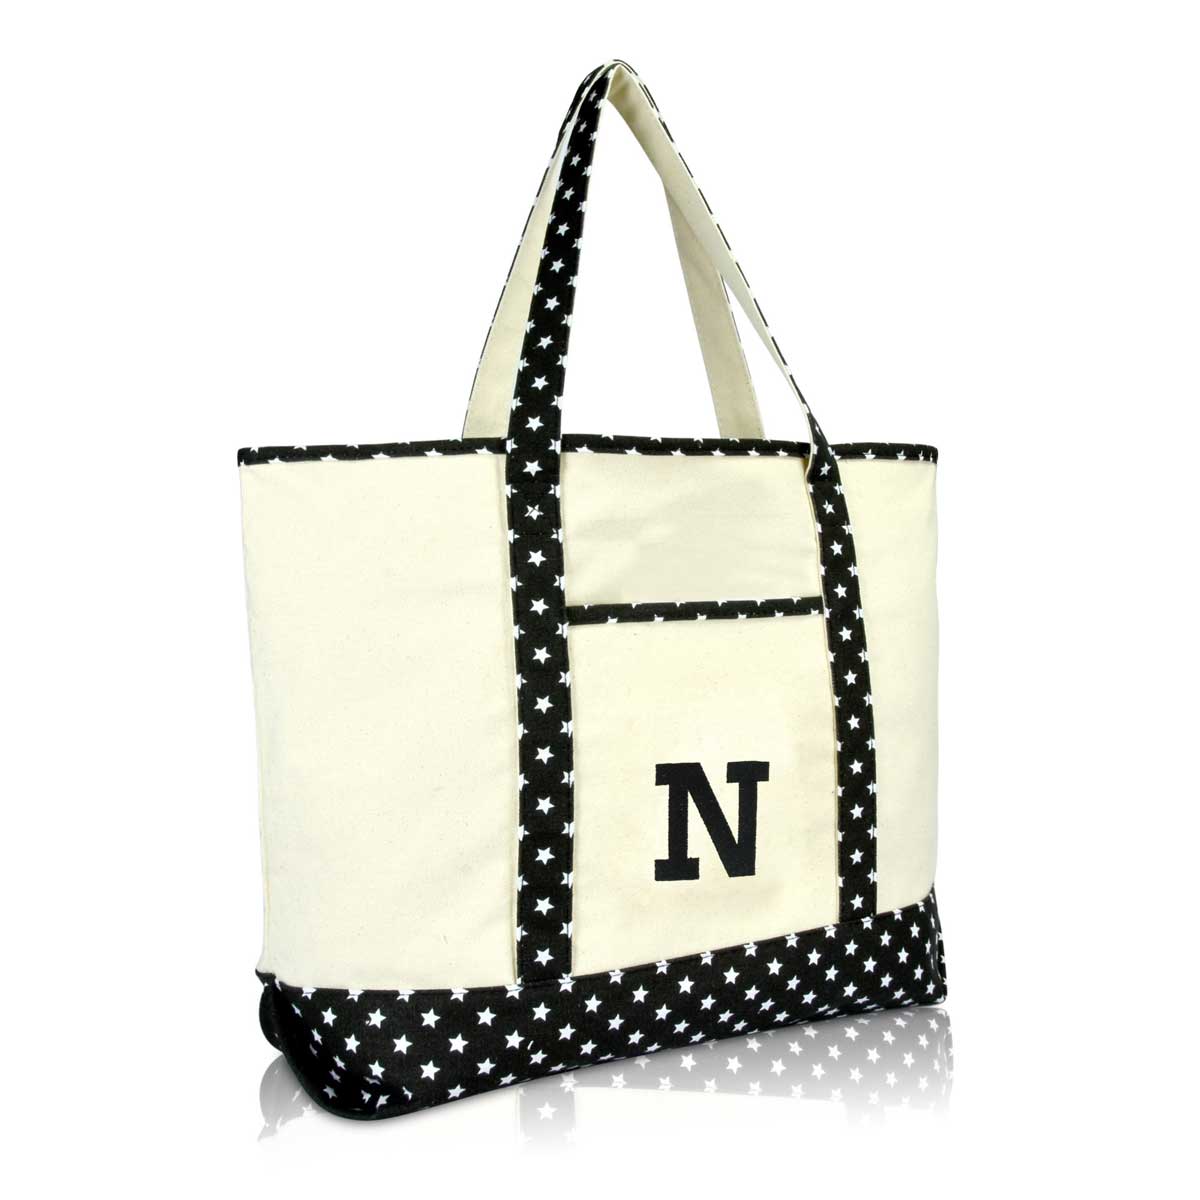 Dalix Initial Tote Bag Personalized Monogram Zippered Top Letter - N